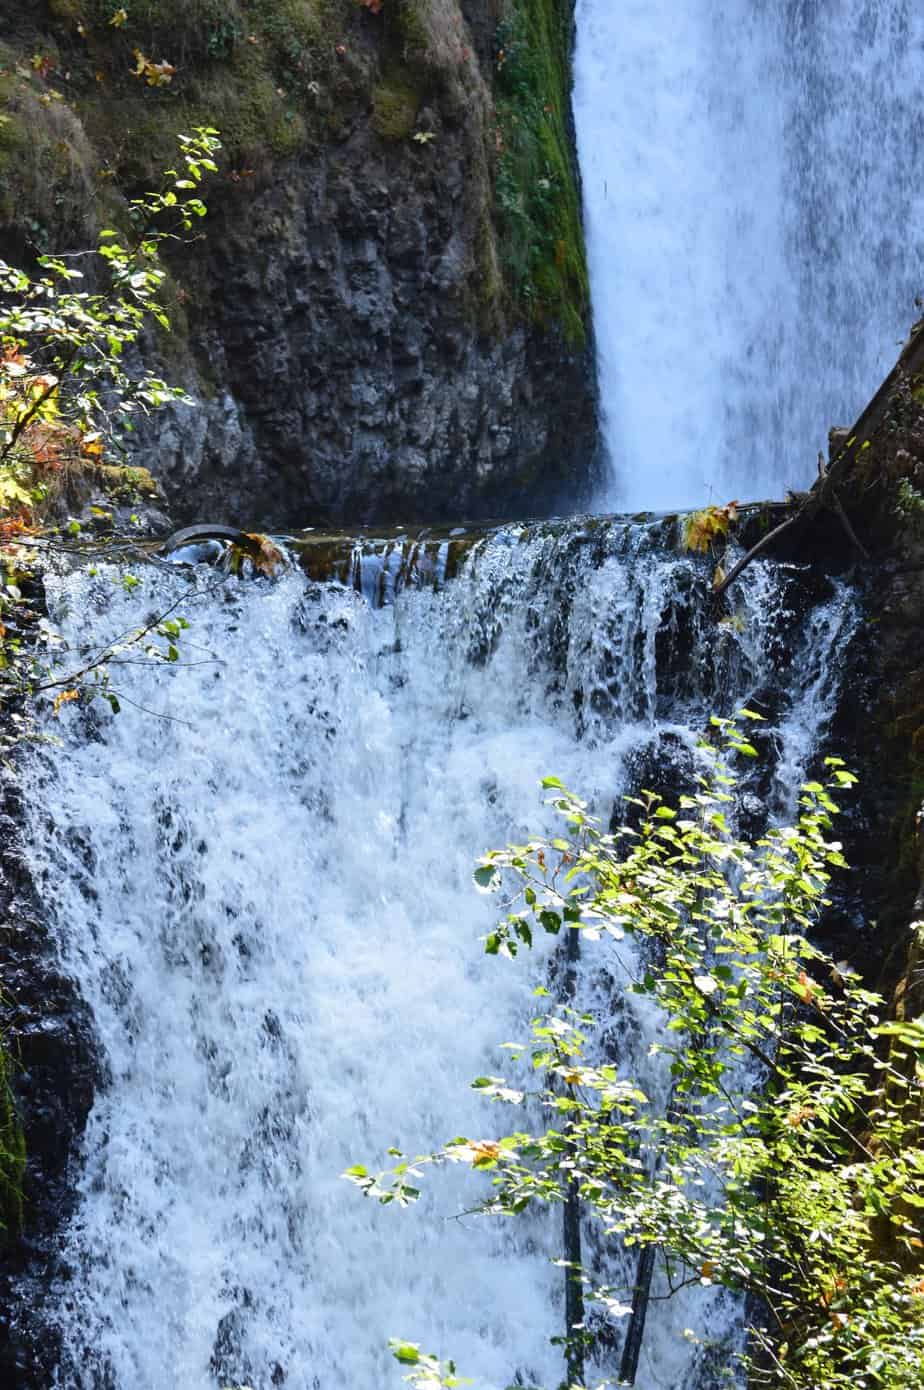 Waterfall along the Columbia River Gorge's waterfall corridor. Read on for more Oregon National Parks and NPS-administered sites.